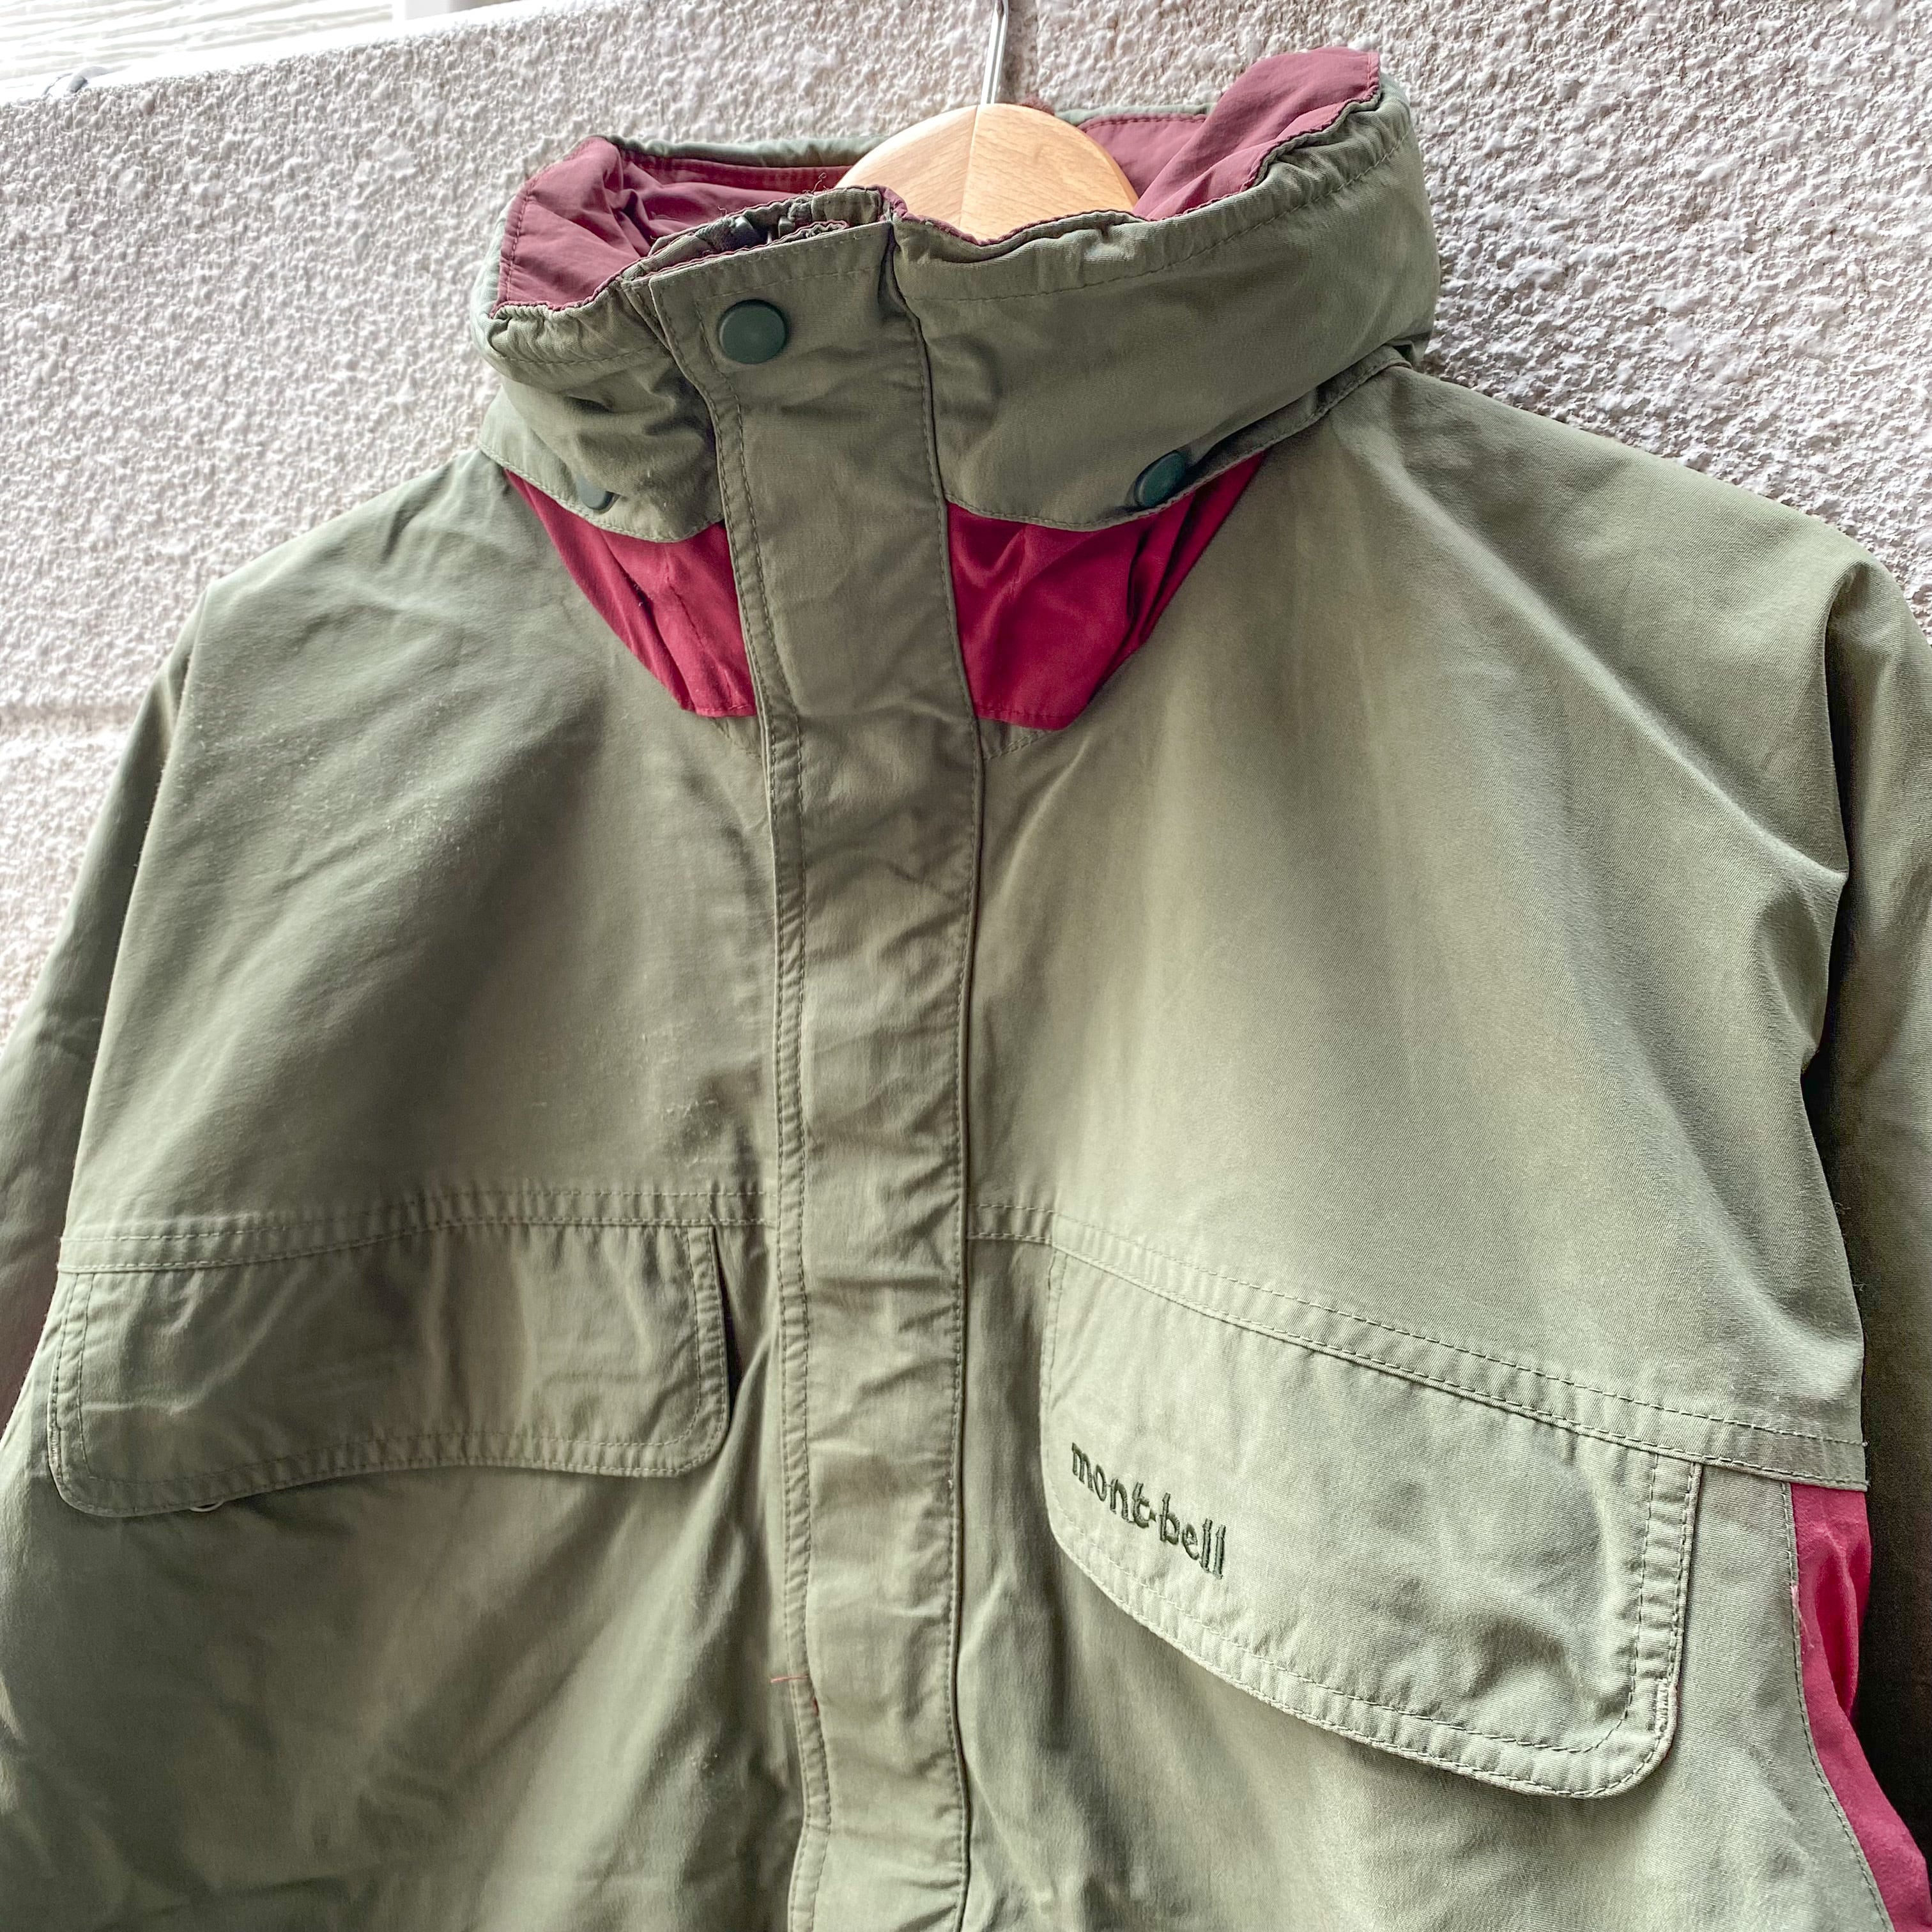 90's Old mont-bell Mountain Jacket M / オールドモンベル ナイロン